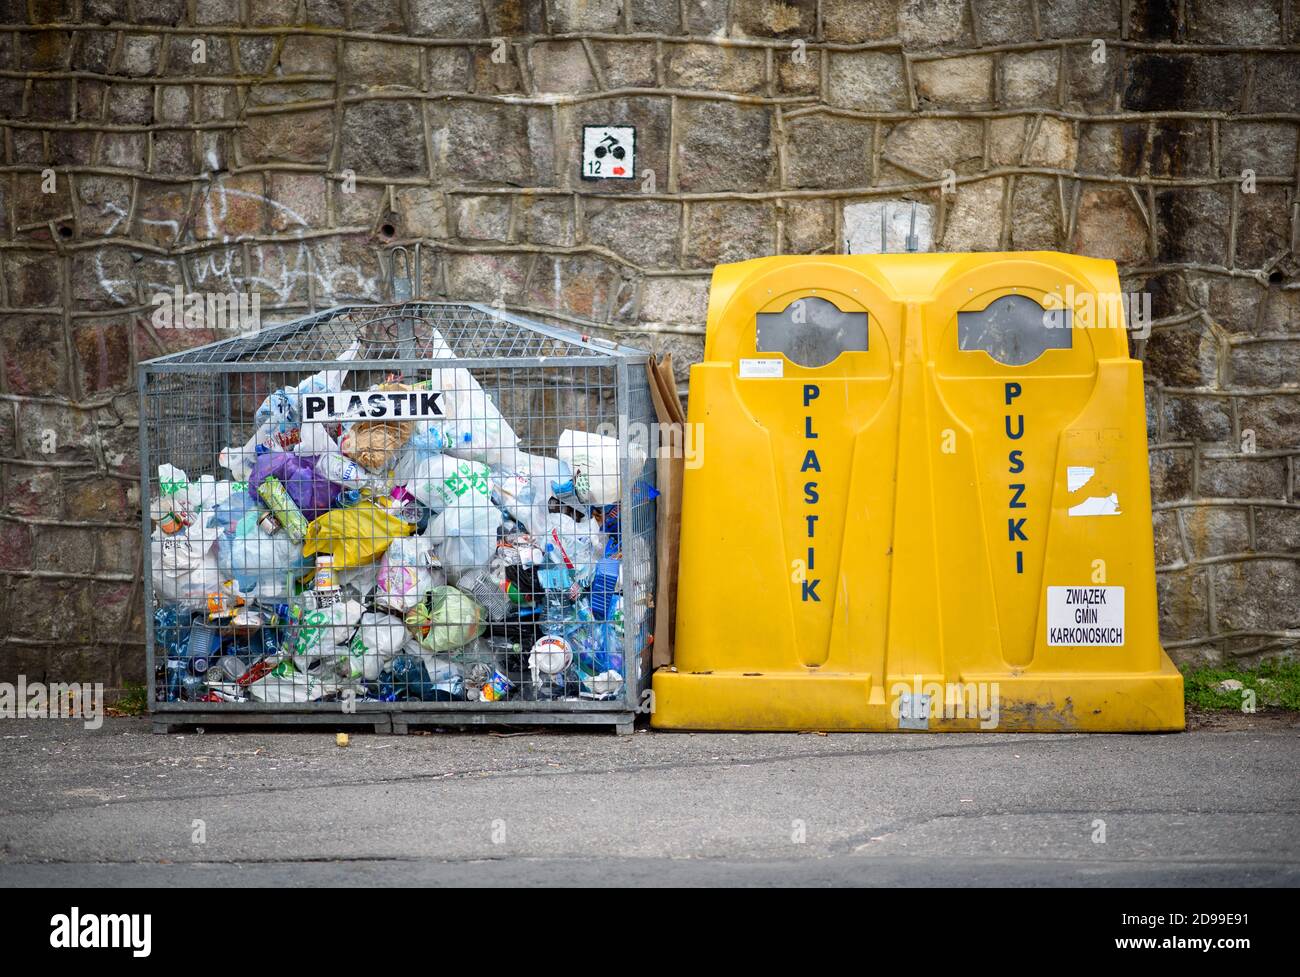 Szklarska Poreba, Poland / 08.09.2019: Colorful garbage containers for recycling of plastics and cans on one of the streets in Szklarska Poreba,Poland Stock Photo